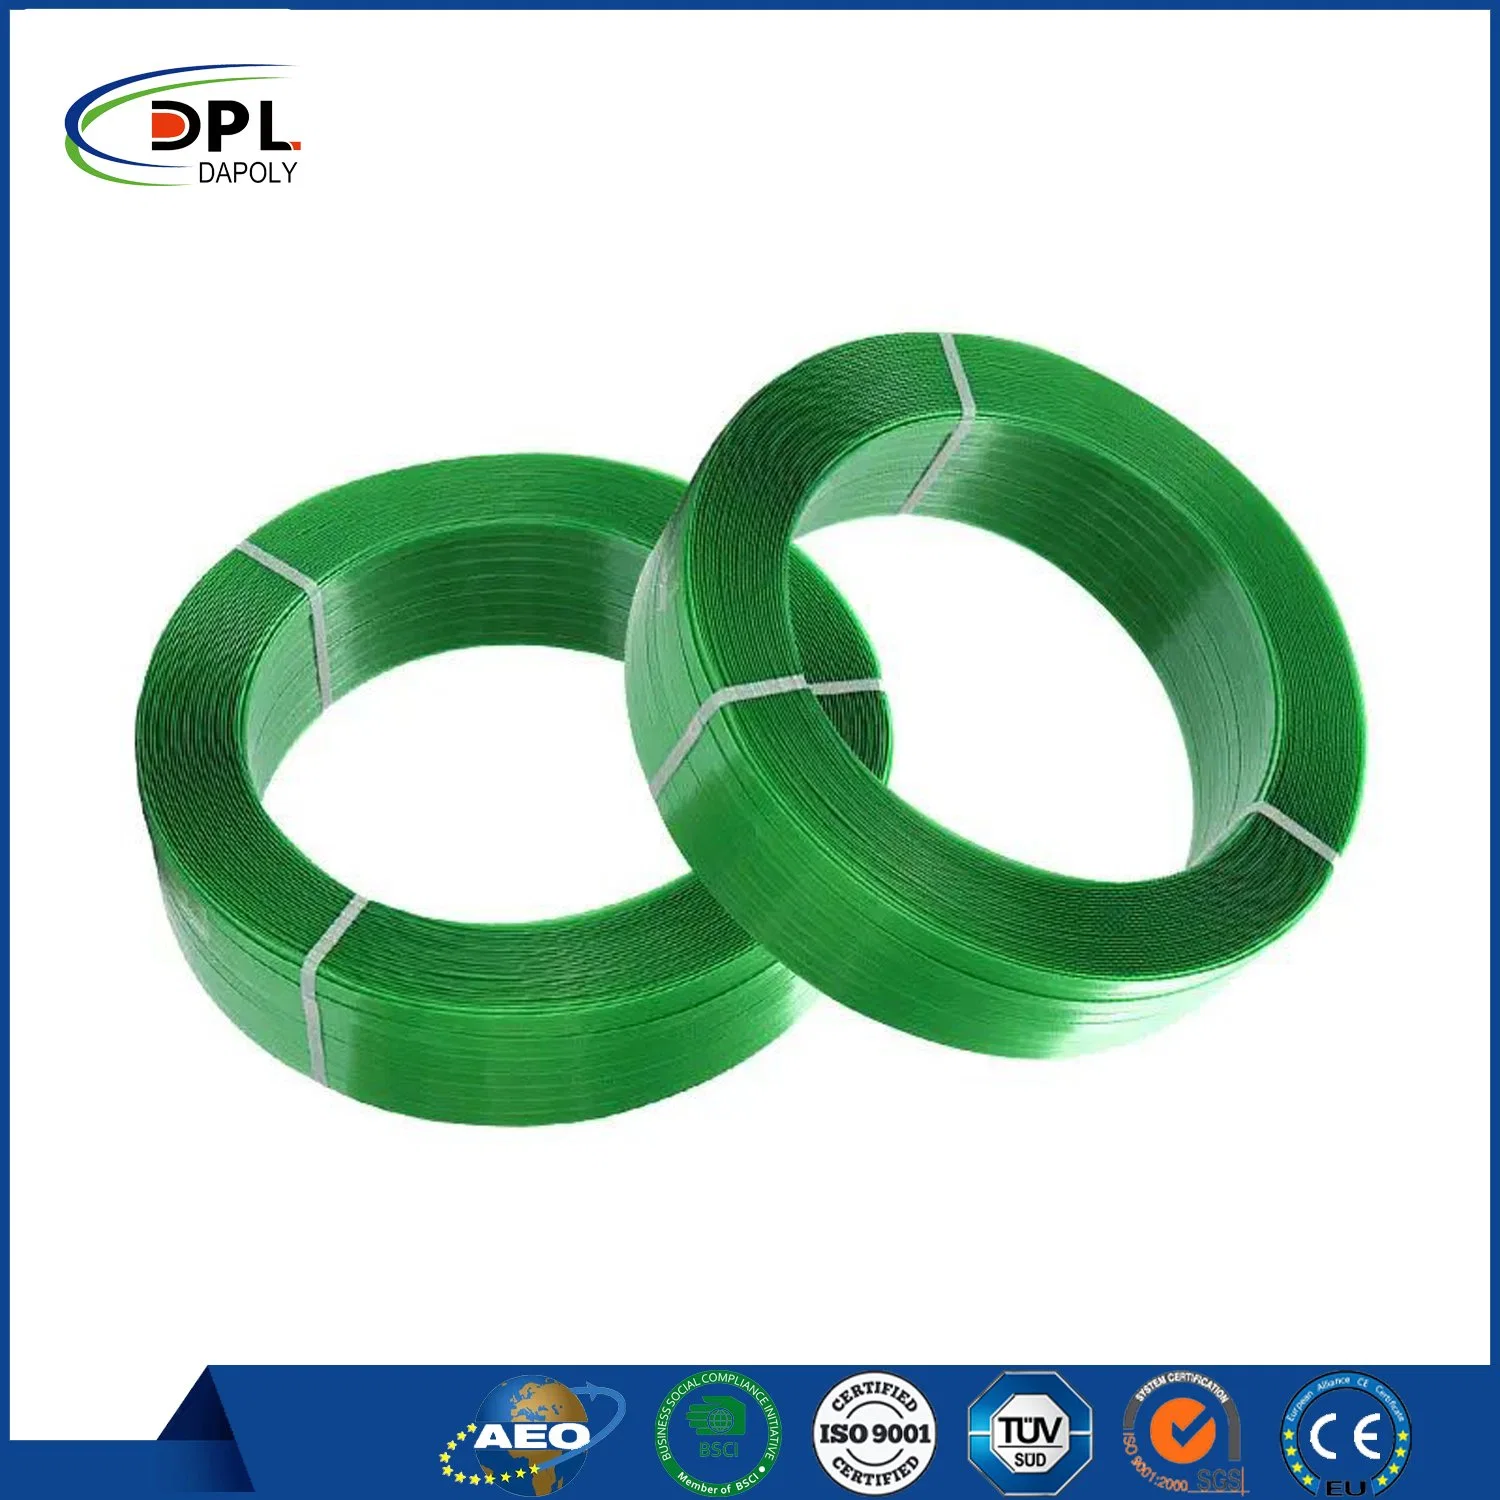 Polyester Strapping 19 mm High quality/High cost performance Pet Strapping Band Rigid Strapping Tape Global Hot Sell